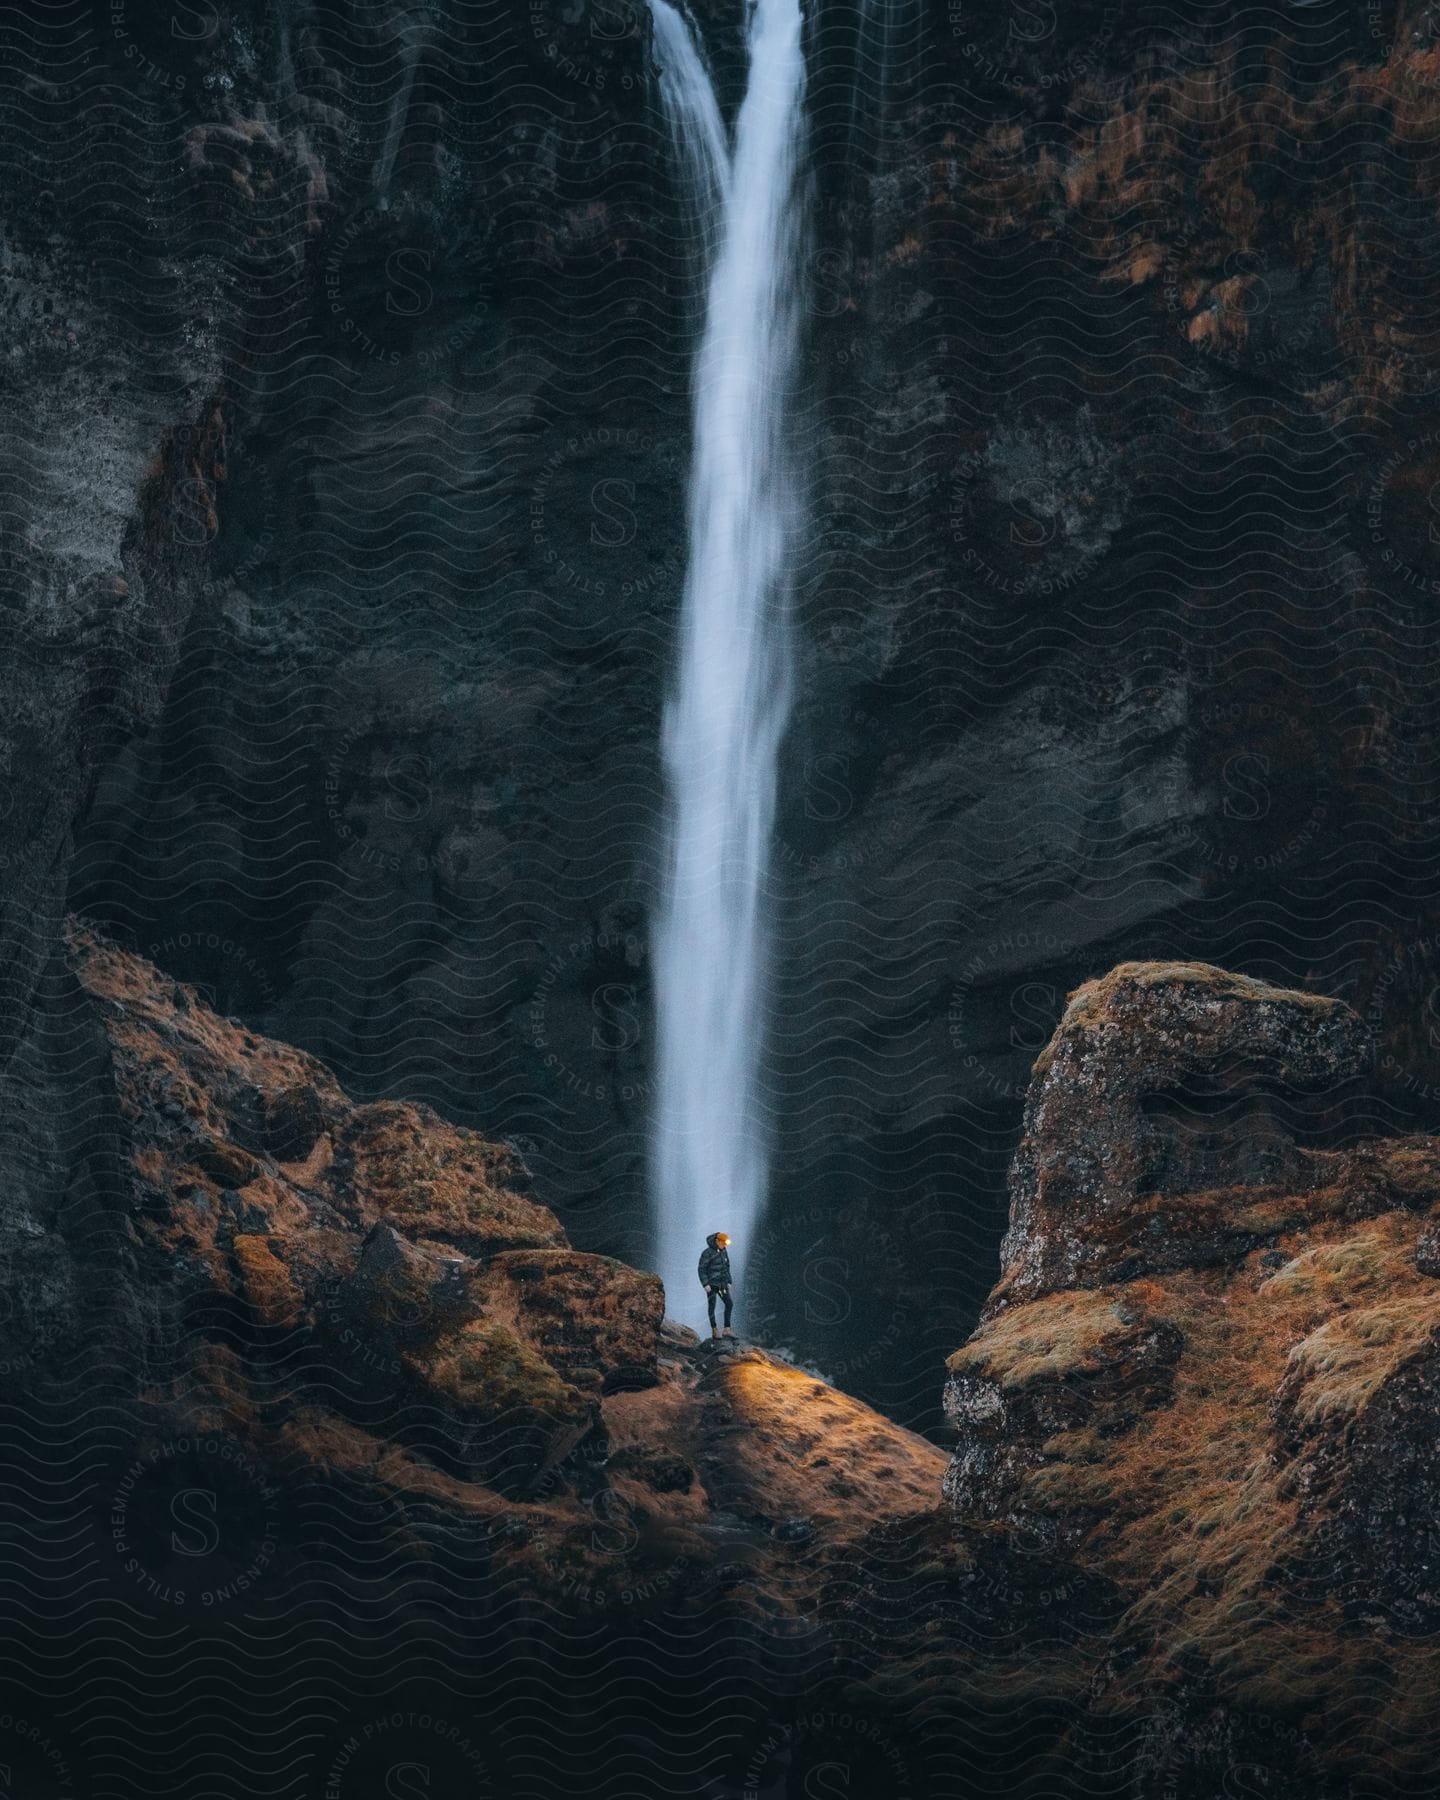 A person gazes at a waterfall in awe of its beauty